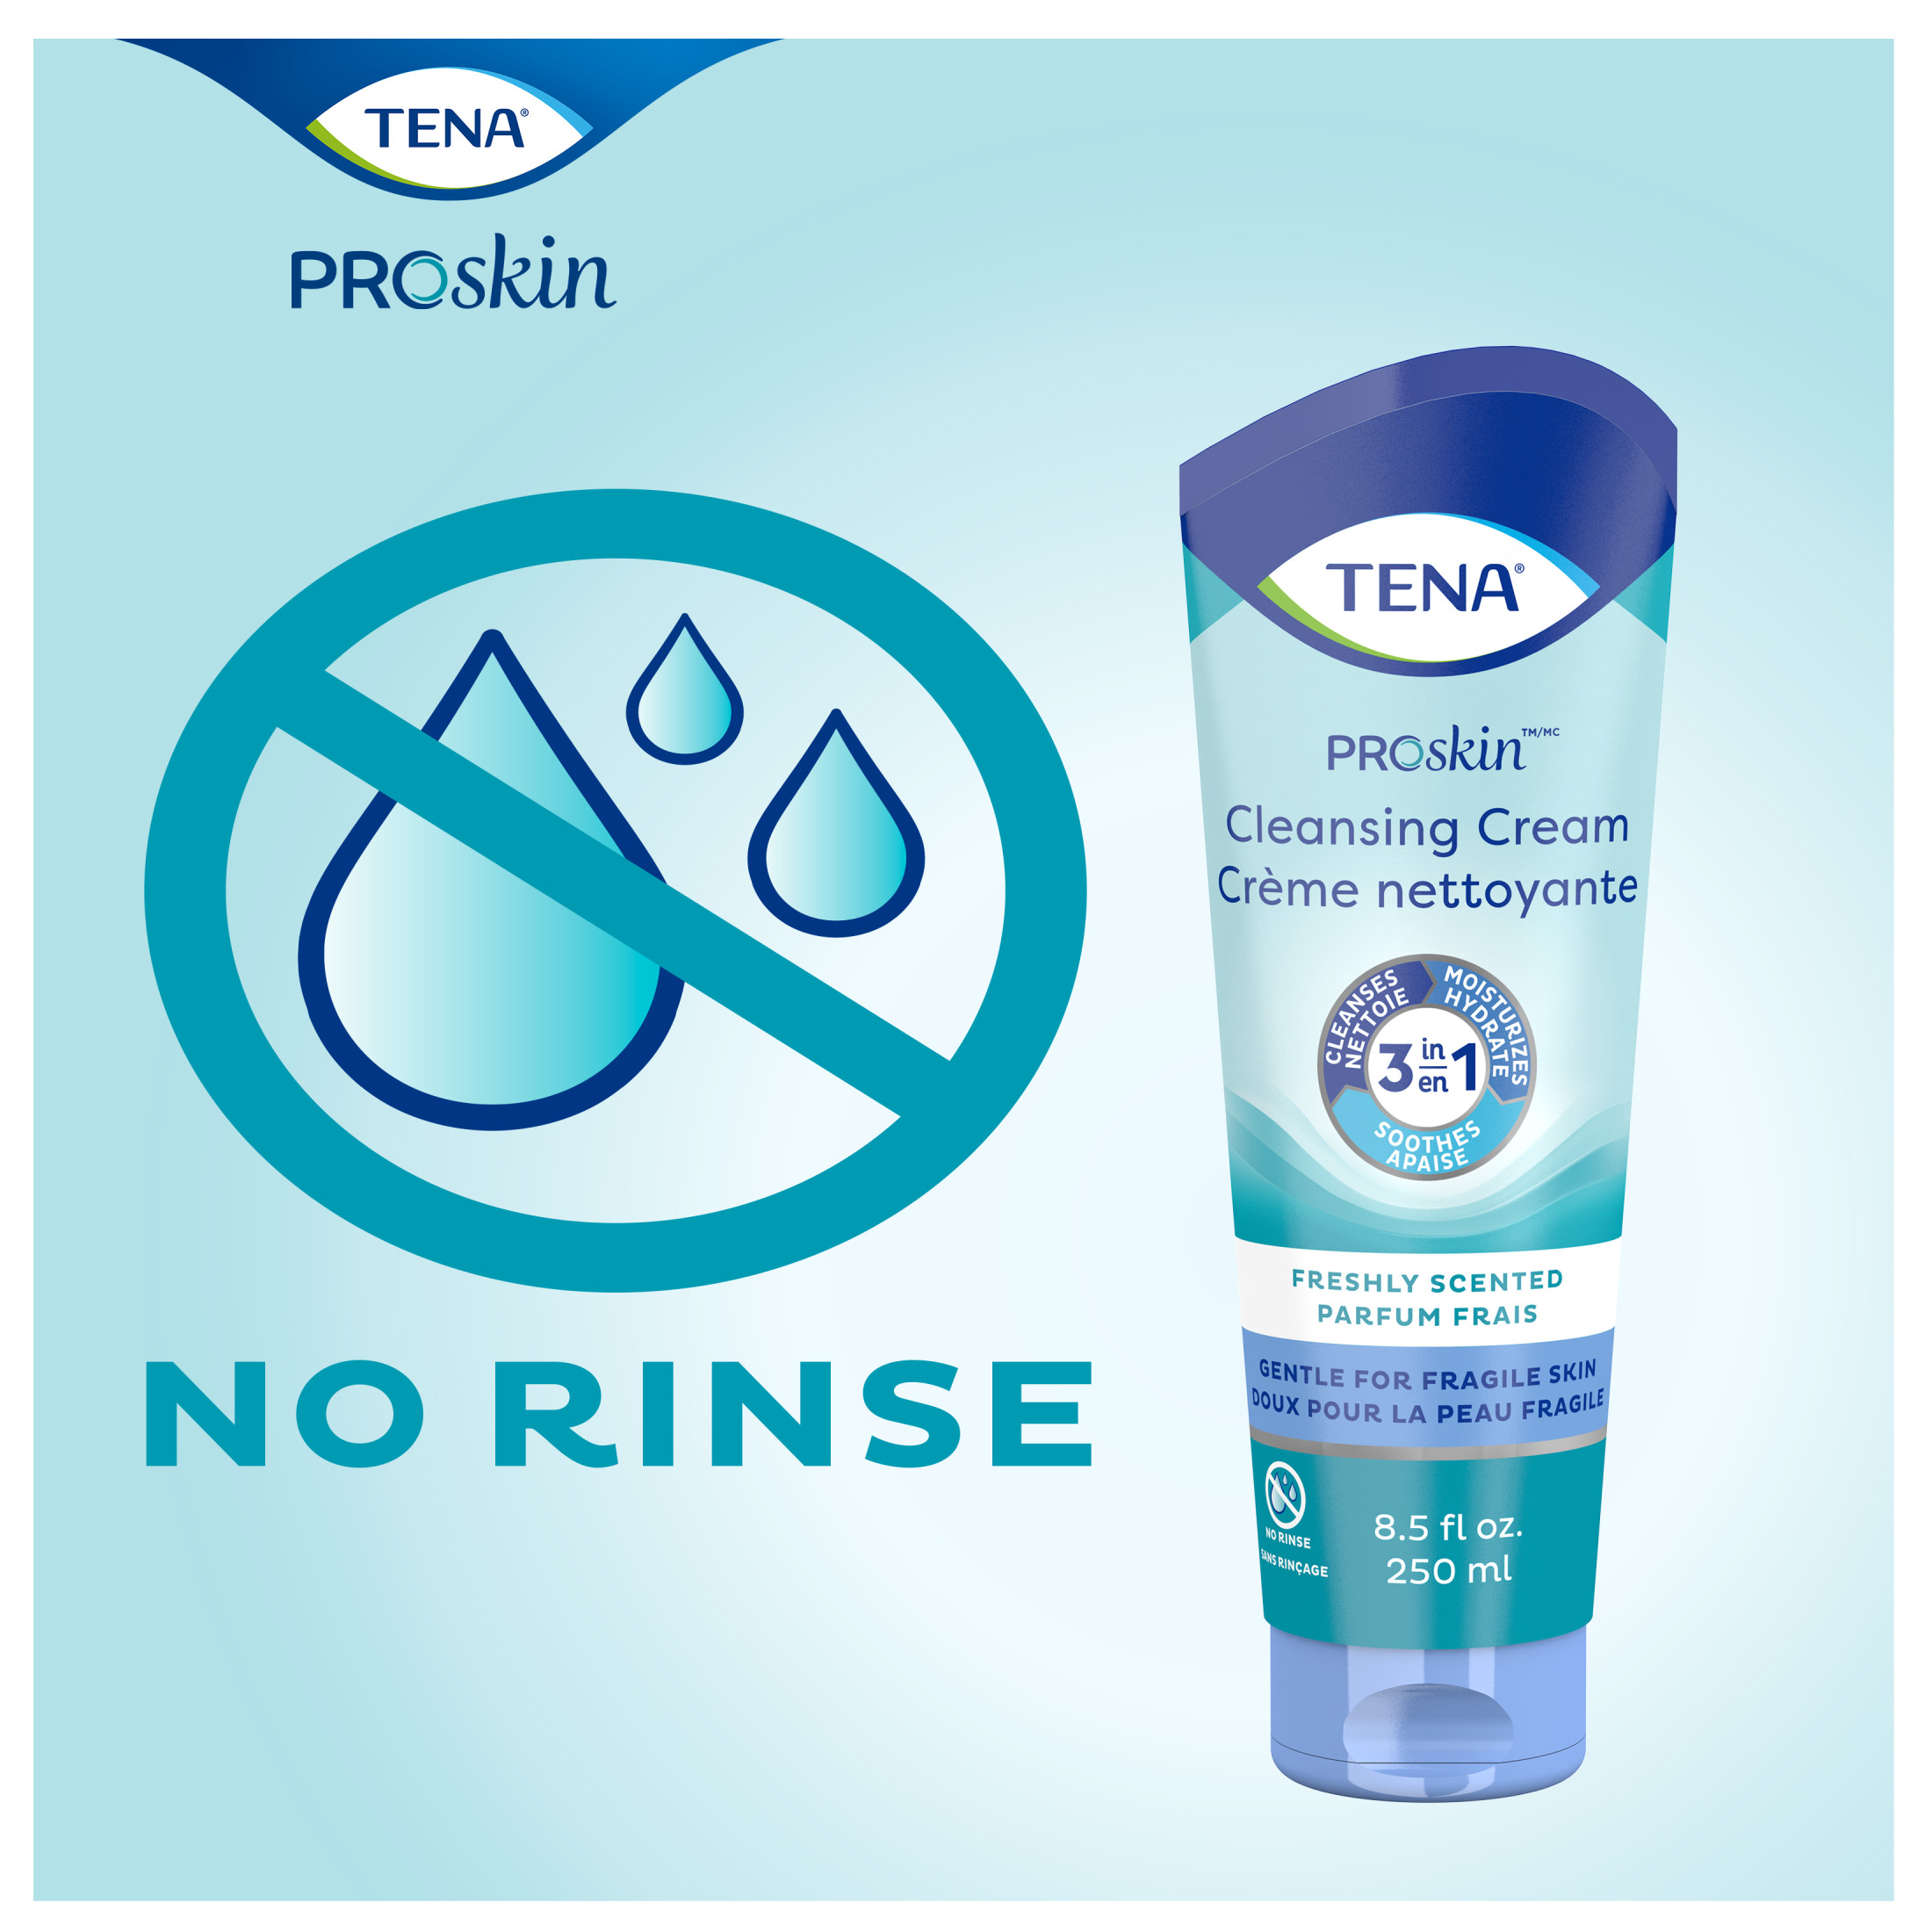 Tena ProSkin Cleansing Cream promotes skin health by gently cleansing, moisturizing and soothing skin. No rinse formula makes bathing easy. - image 4 of 7